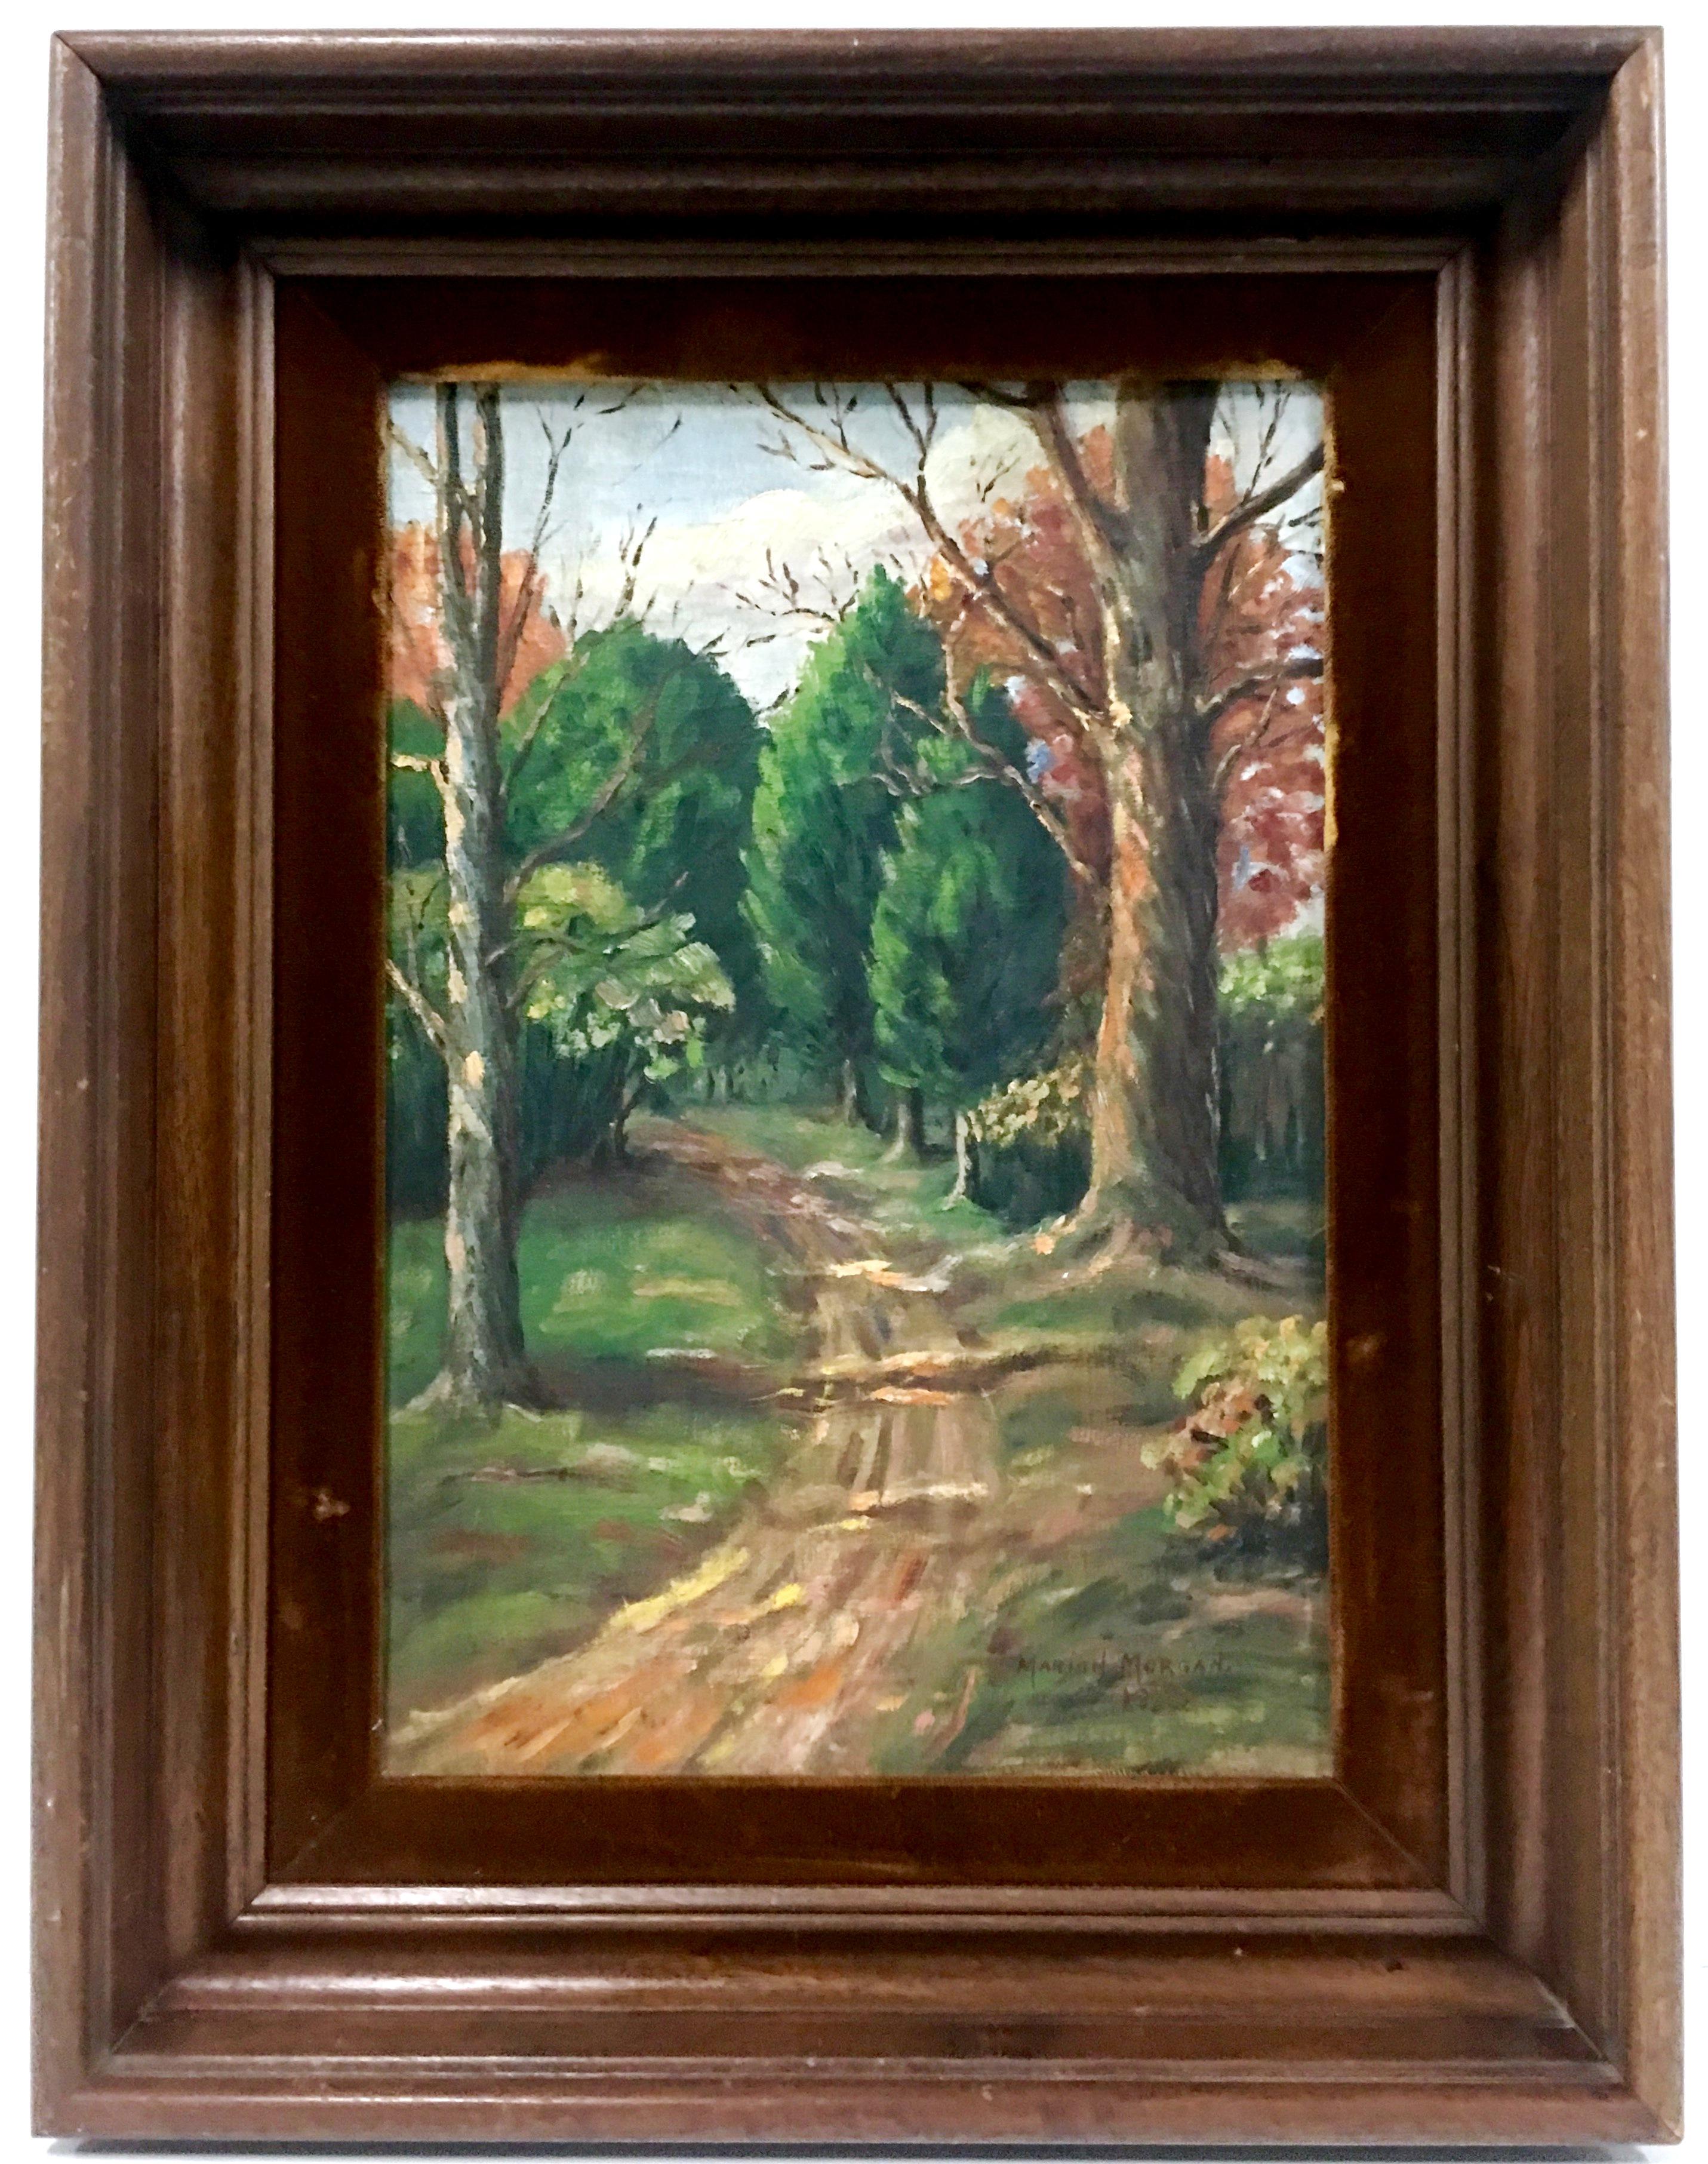 1932 Original oil on canvas board painting by, Marion Morgan. Signed lower right, Marion Morgan 1921. Framed in a dark wood stained frame with brown velvet matte. Image size, 13